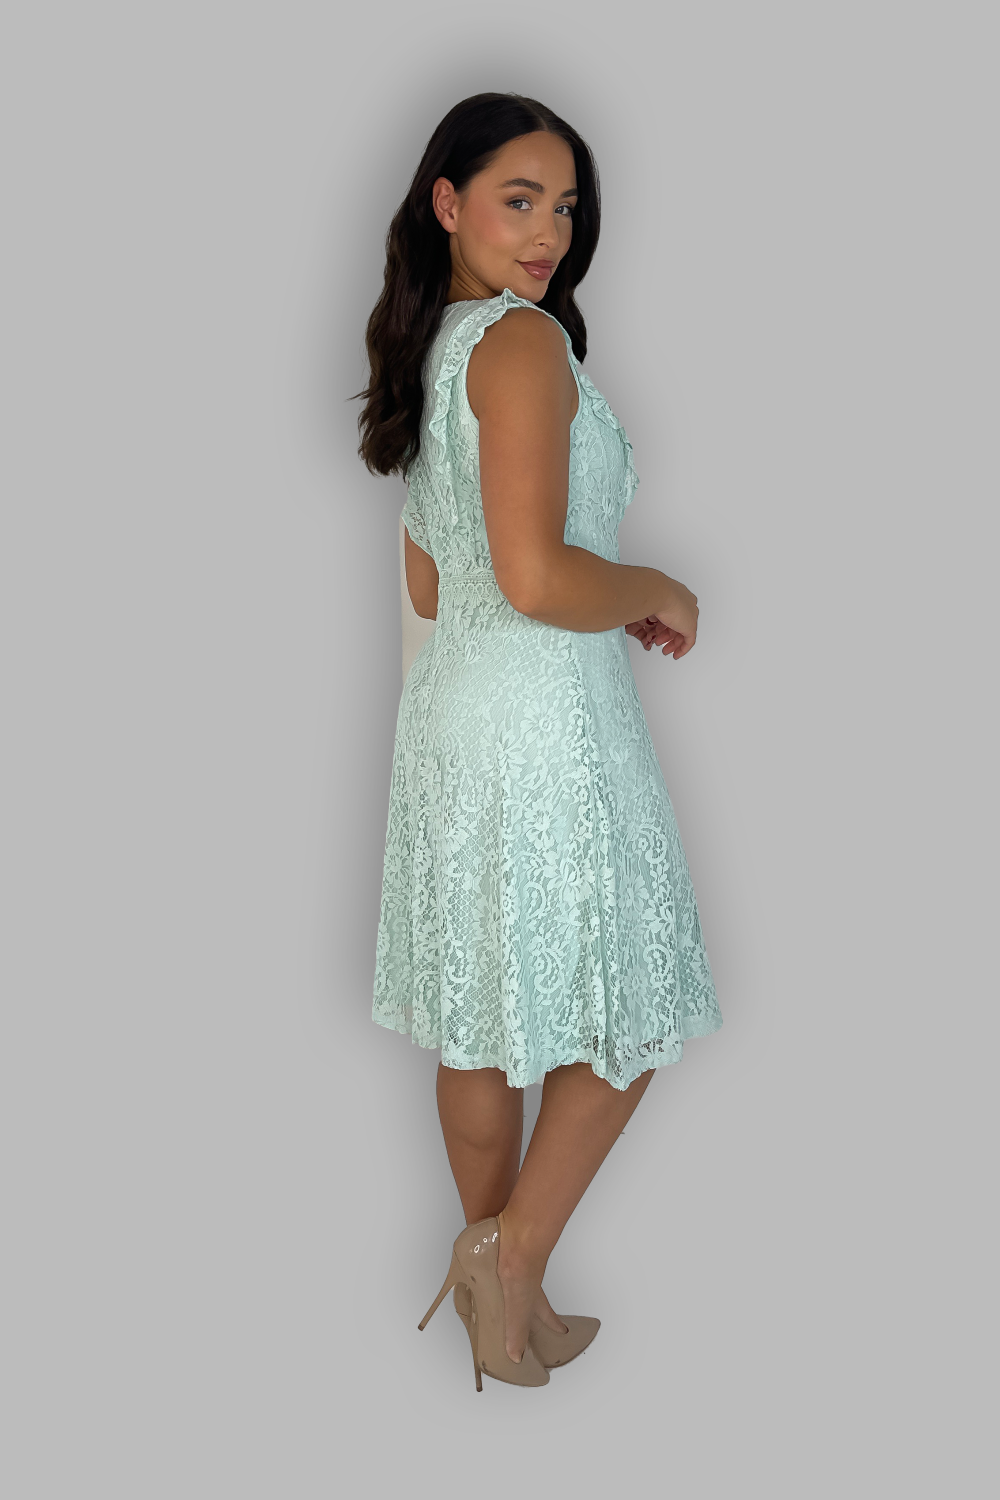 All Over Lace Sleeveless Cocktail Dress